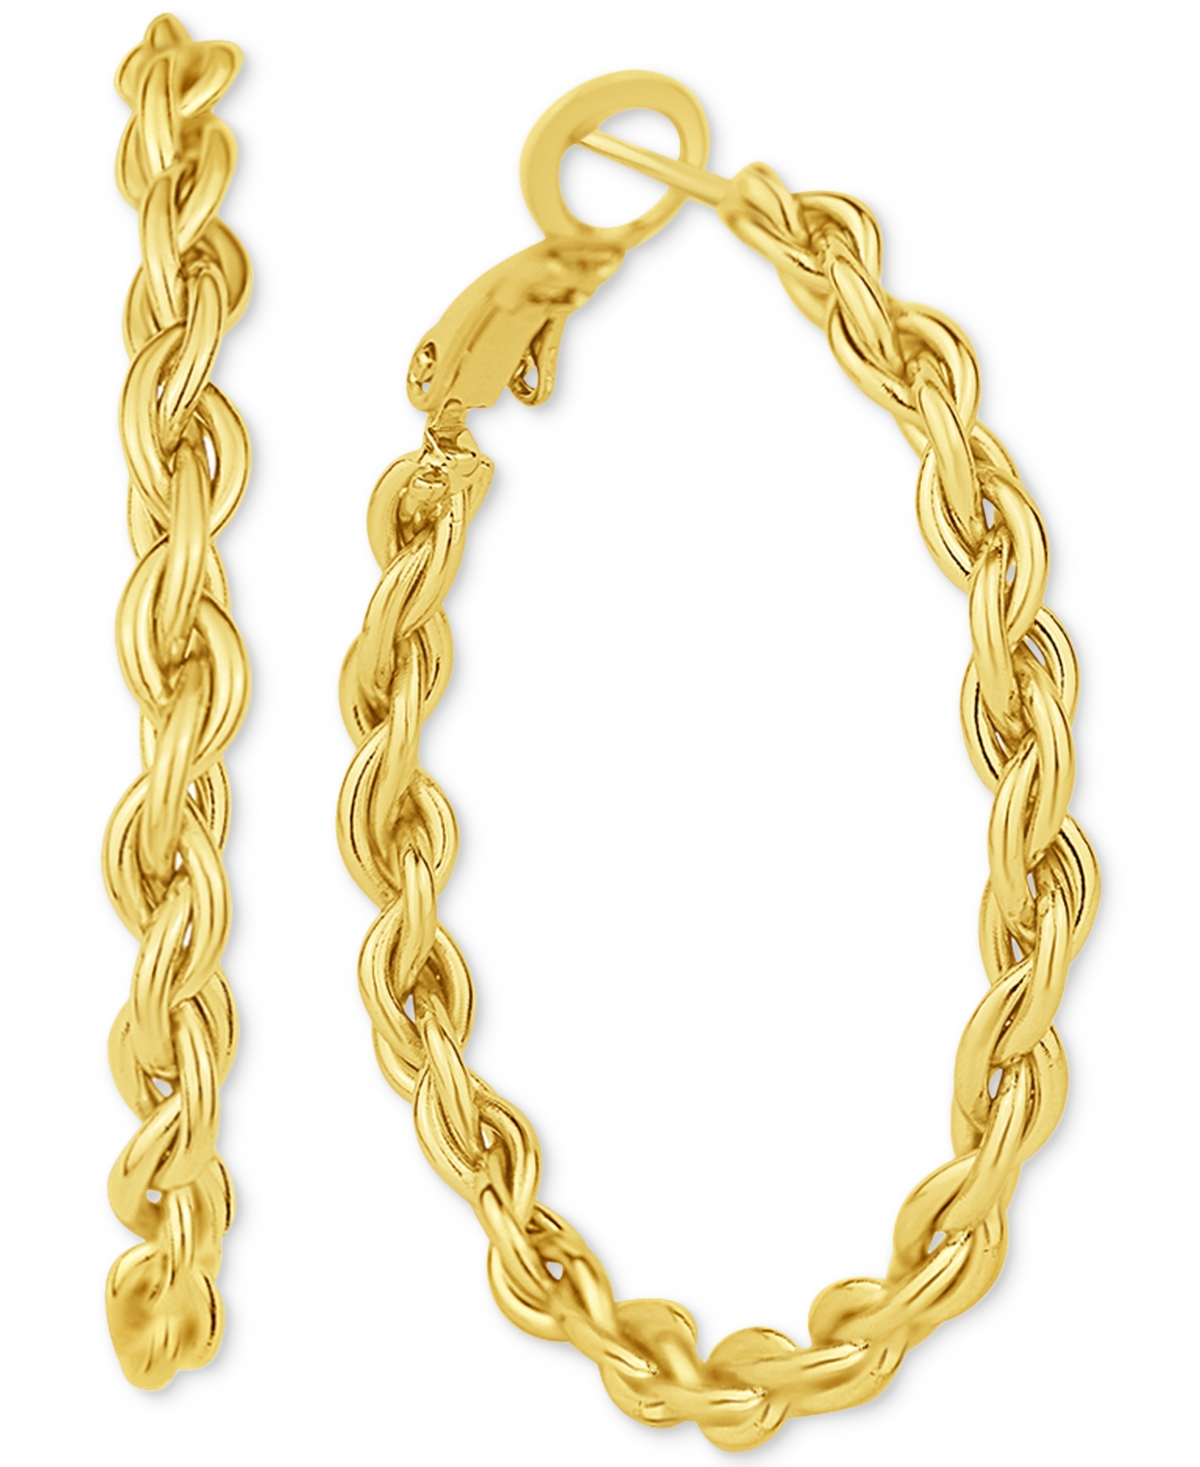 And Now This Braided Link Medium Hoop Earrings, 1.37" In Gold Plated